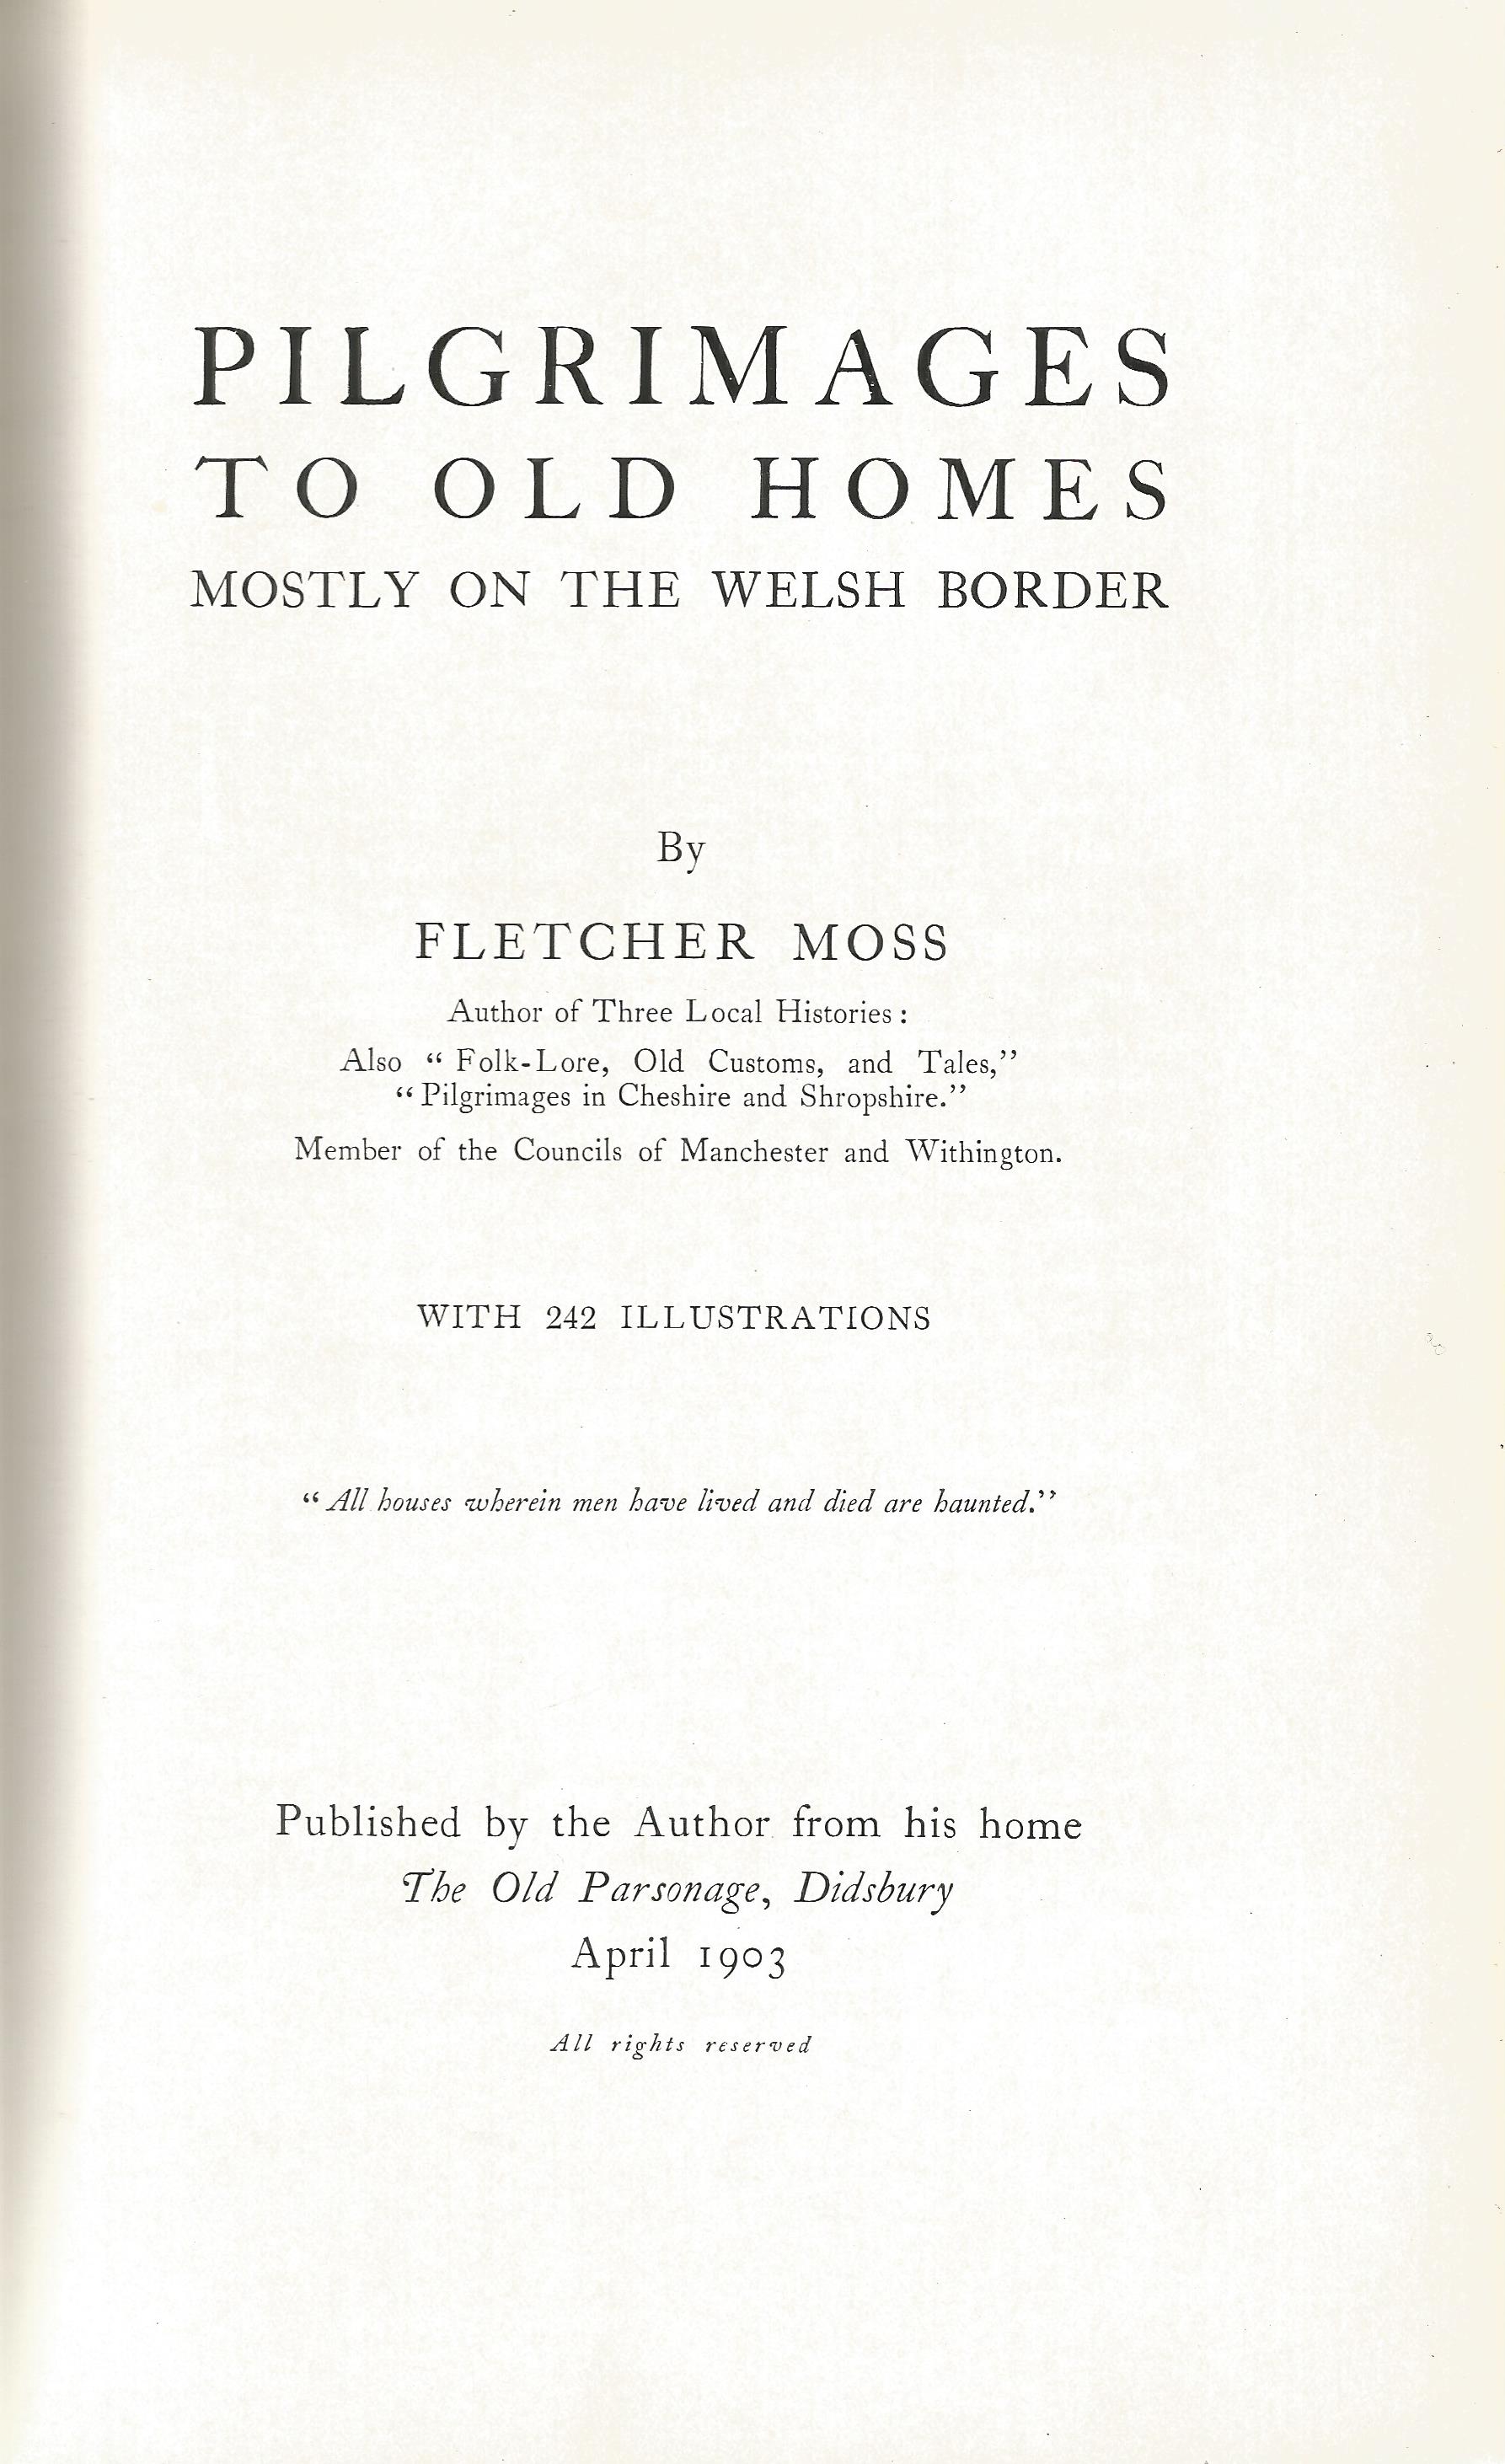 Pilgrimages to Old Homes Mostly on the Welsh Border by Fletcher Moss 1903 Hardback Book printed by - Image 2 of 2